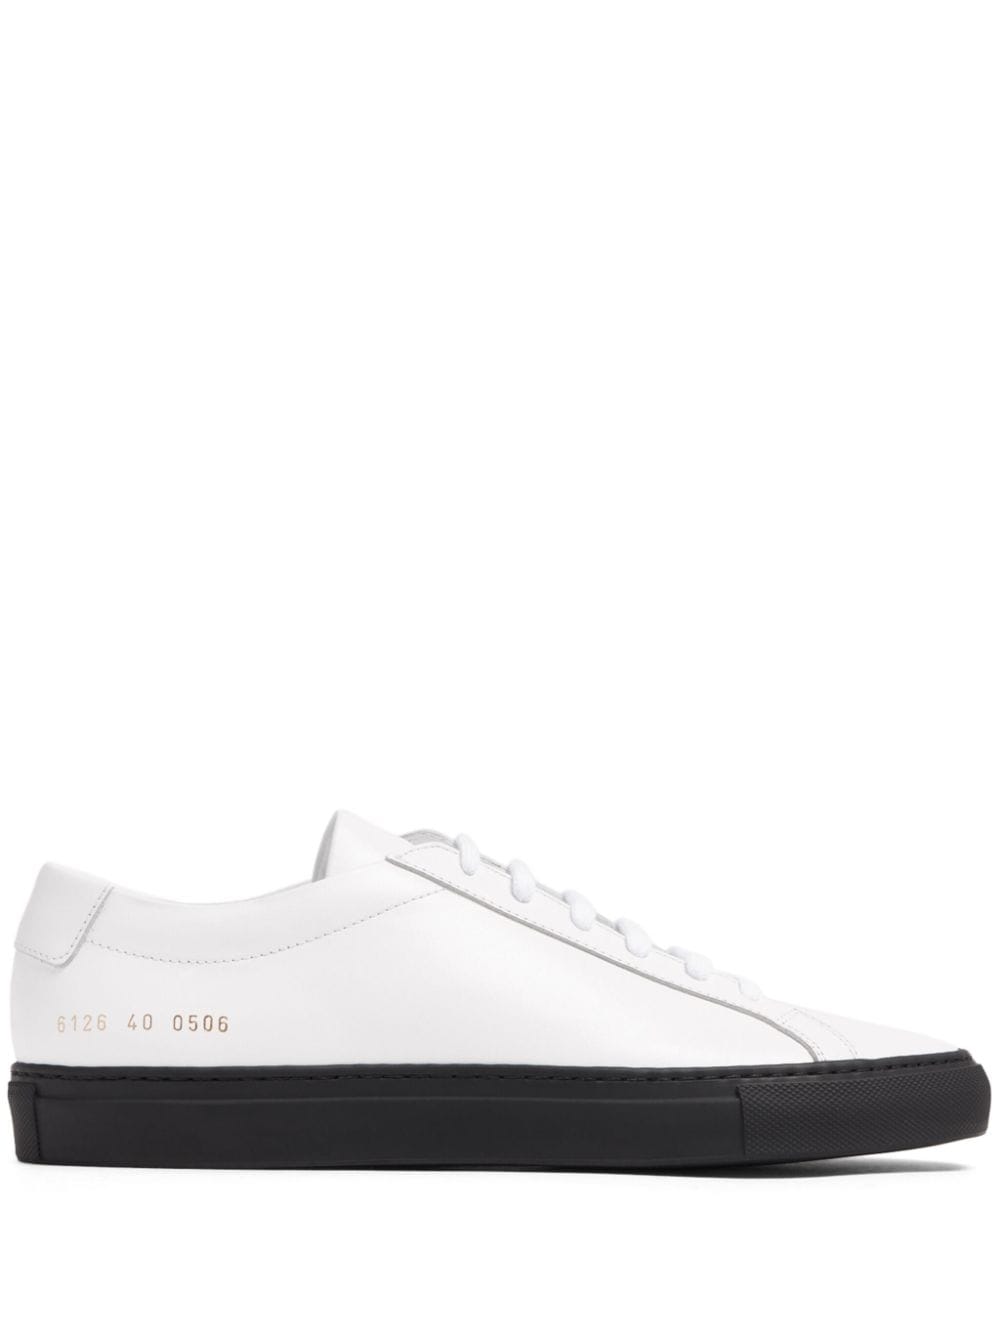 Common Projects lace-up contrasting sole sneakers - White von Common Projects